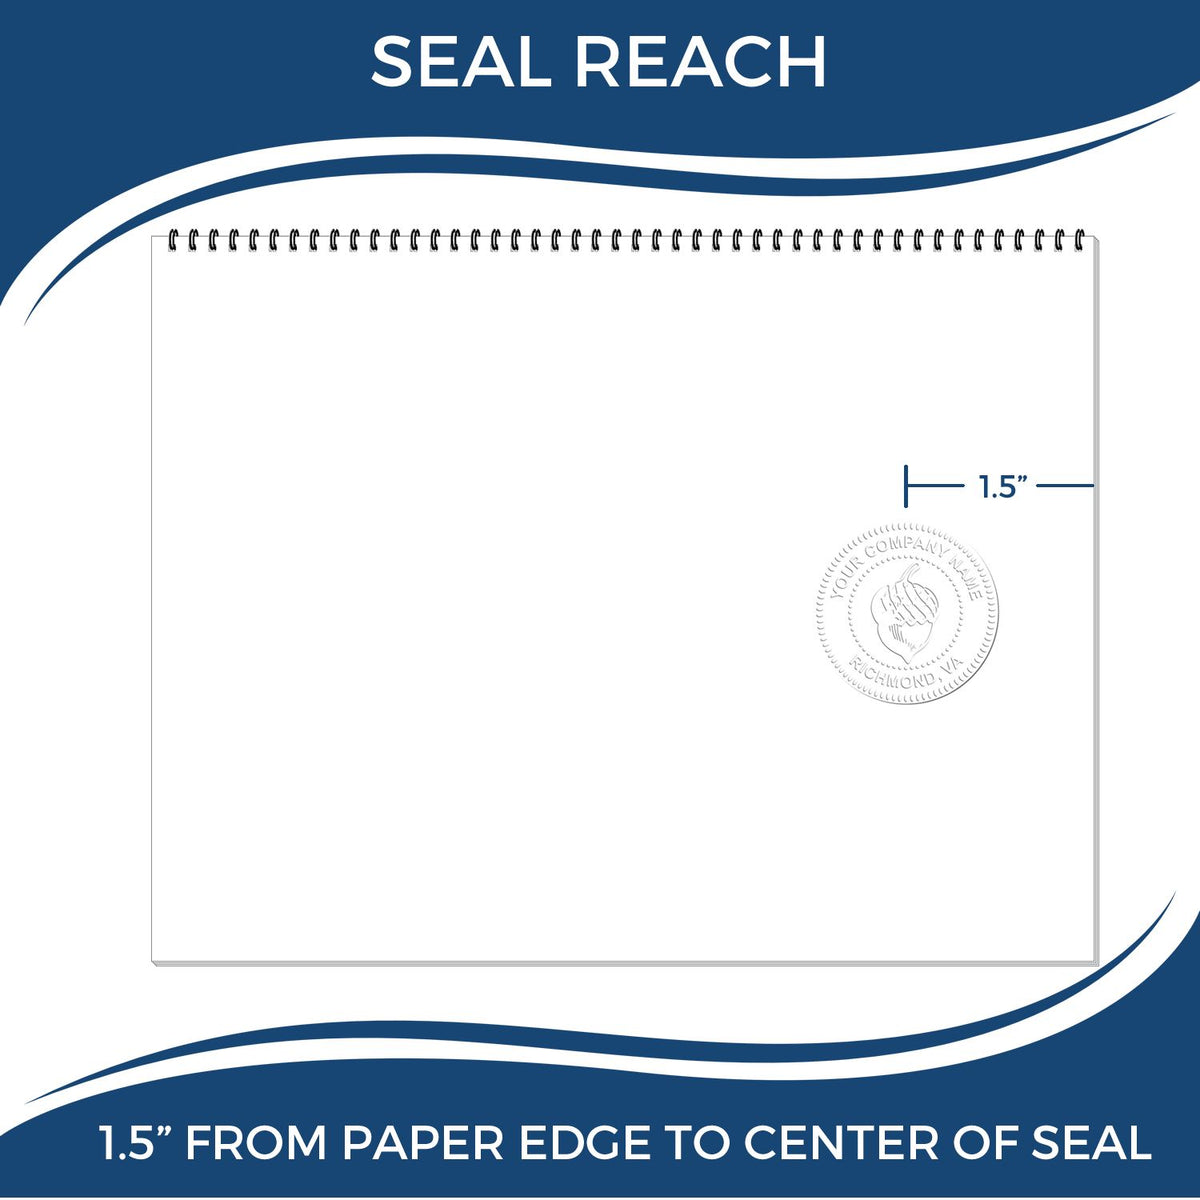 An infographic showing the seal reach which is represented by a ruler and a miniature seal image of the Soft Pocket Maine Landscape Architect Embosser